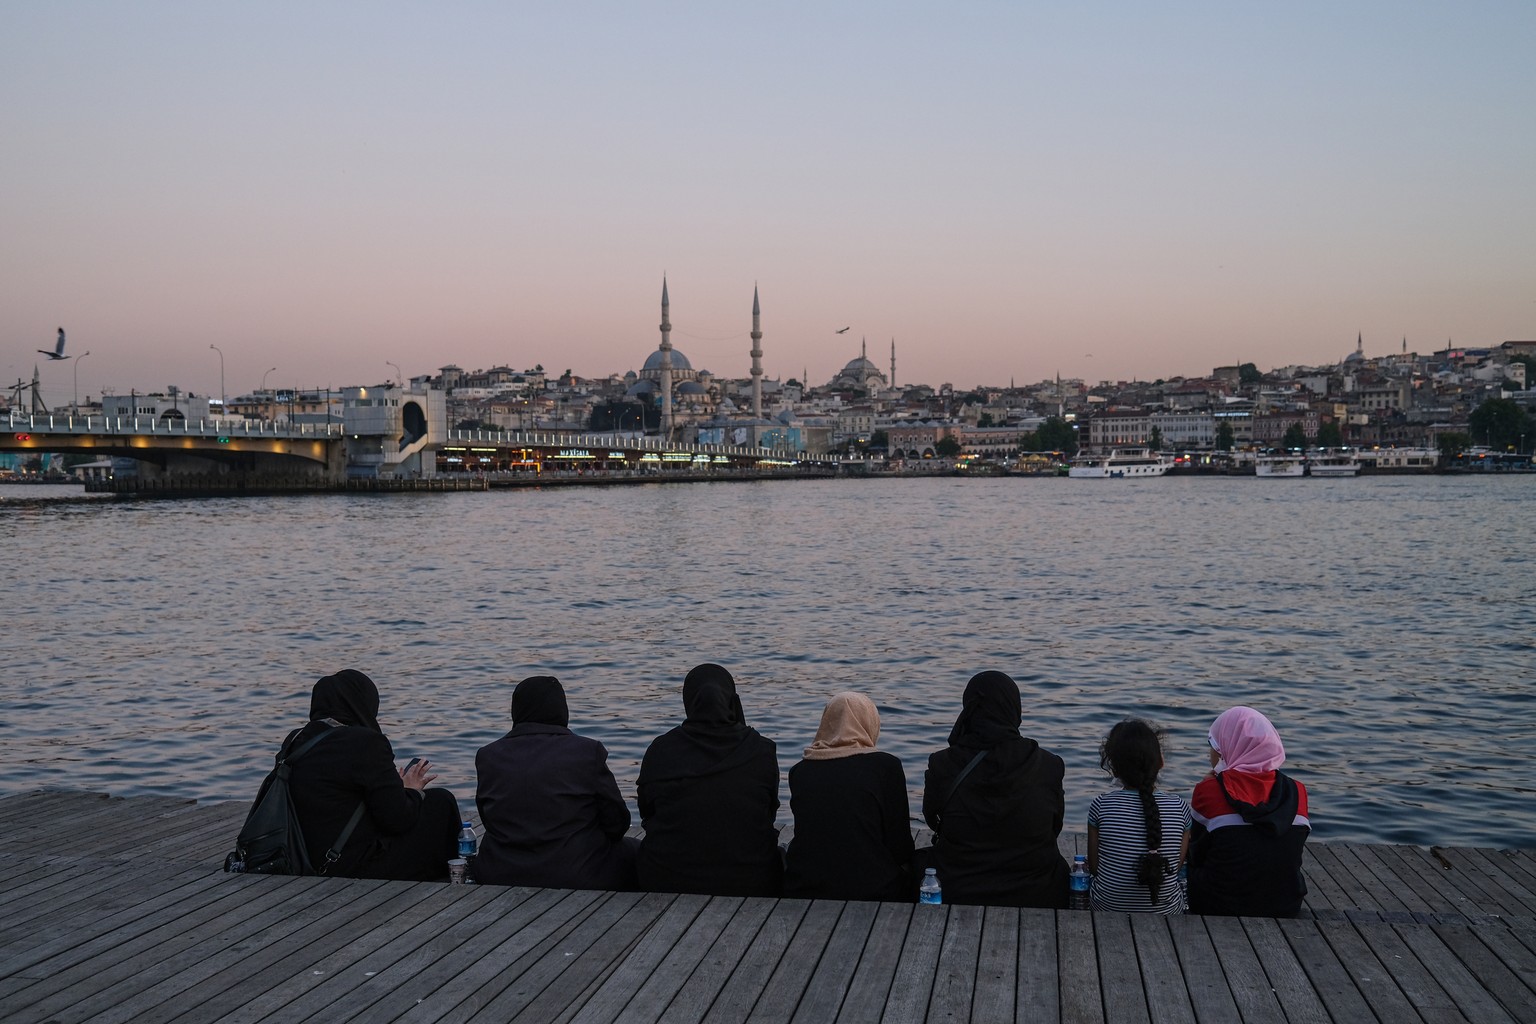 epa08518989 A group of women sit on a platform with a view of the Galata Bridge (L) and the Yeni Mosque (C) amid the ongoing COVID-19 pandemic in Istanbul, Turkey, 30 June 2020. Turkish authorities ha ...